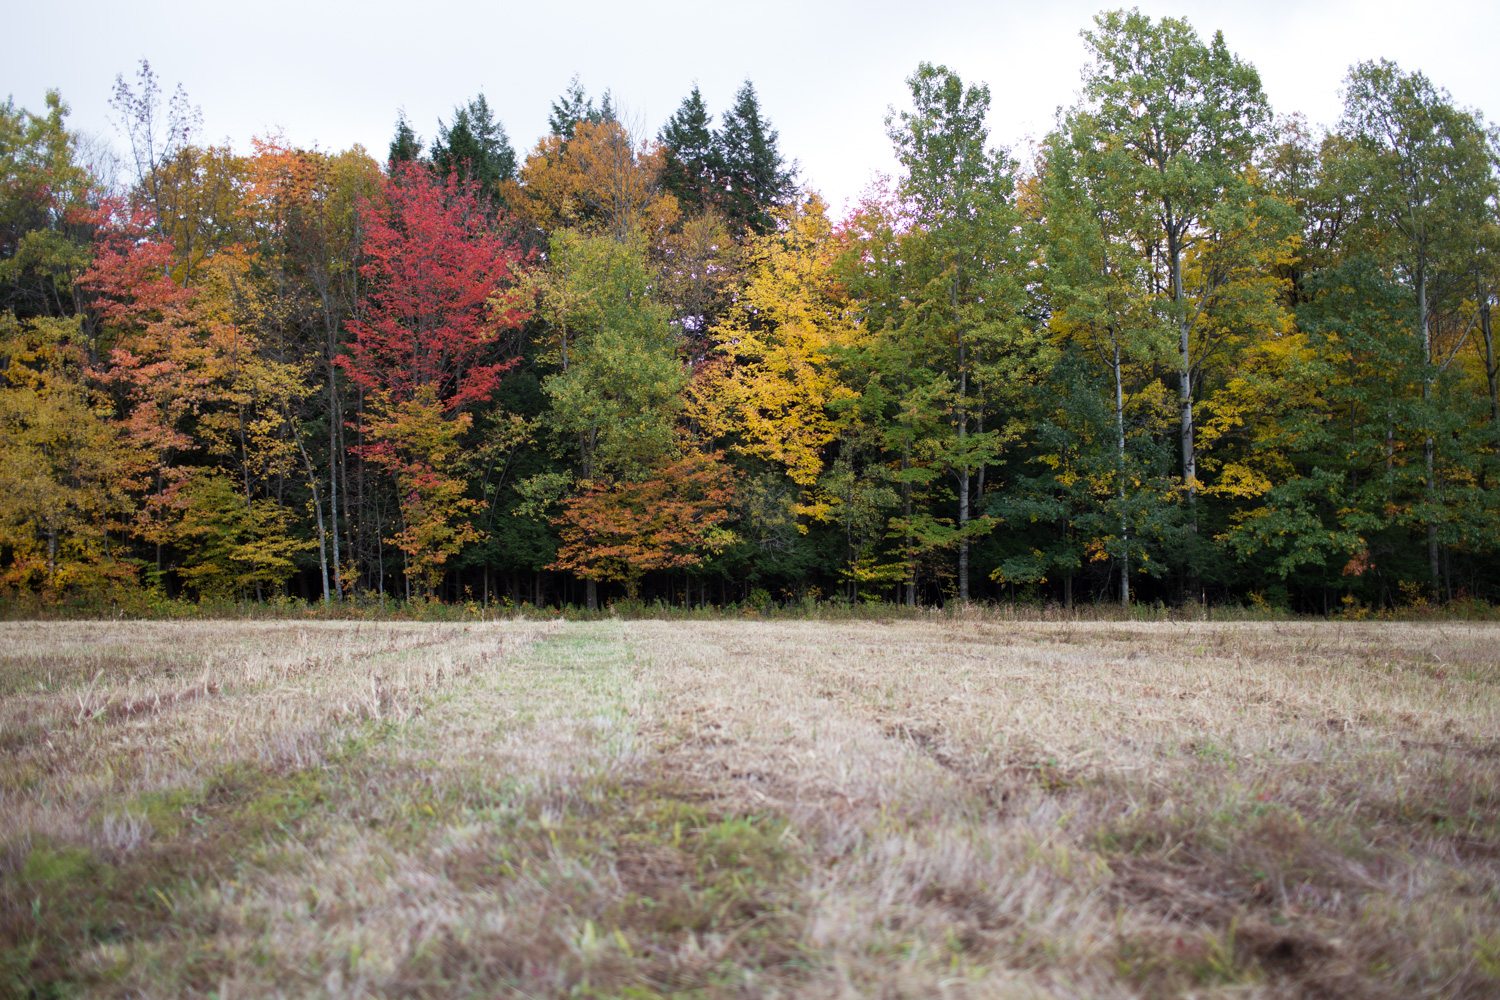 A field bordered by autumn trees